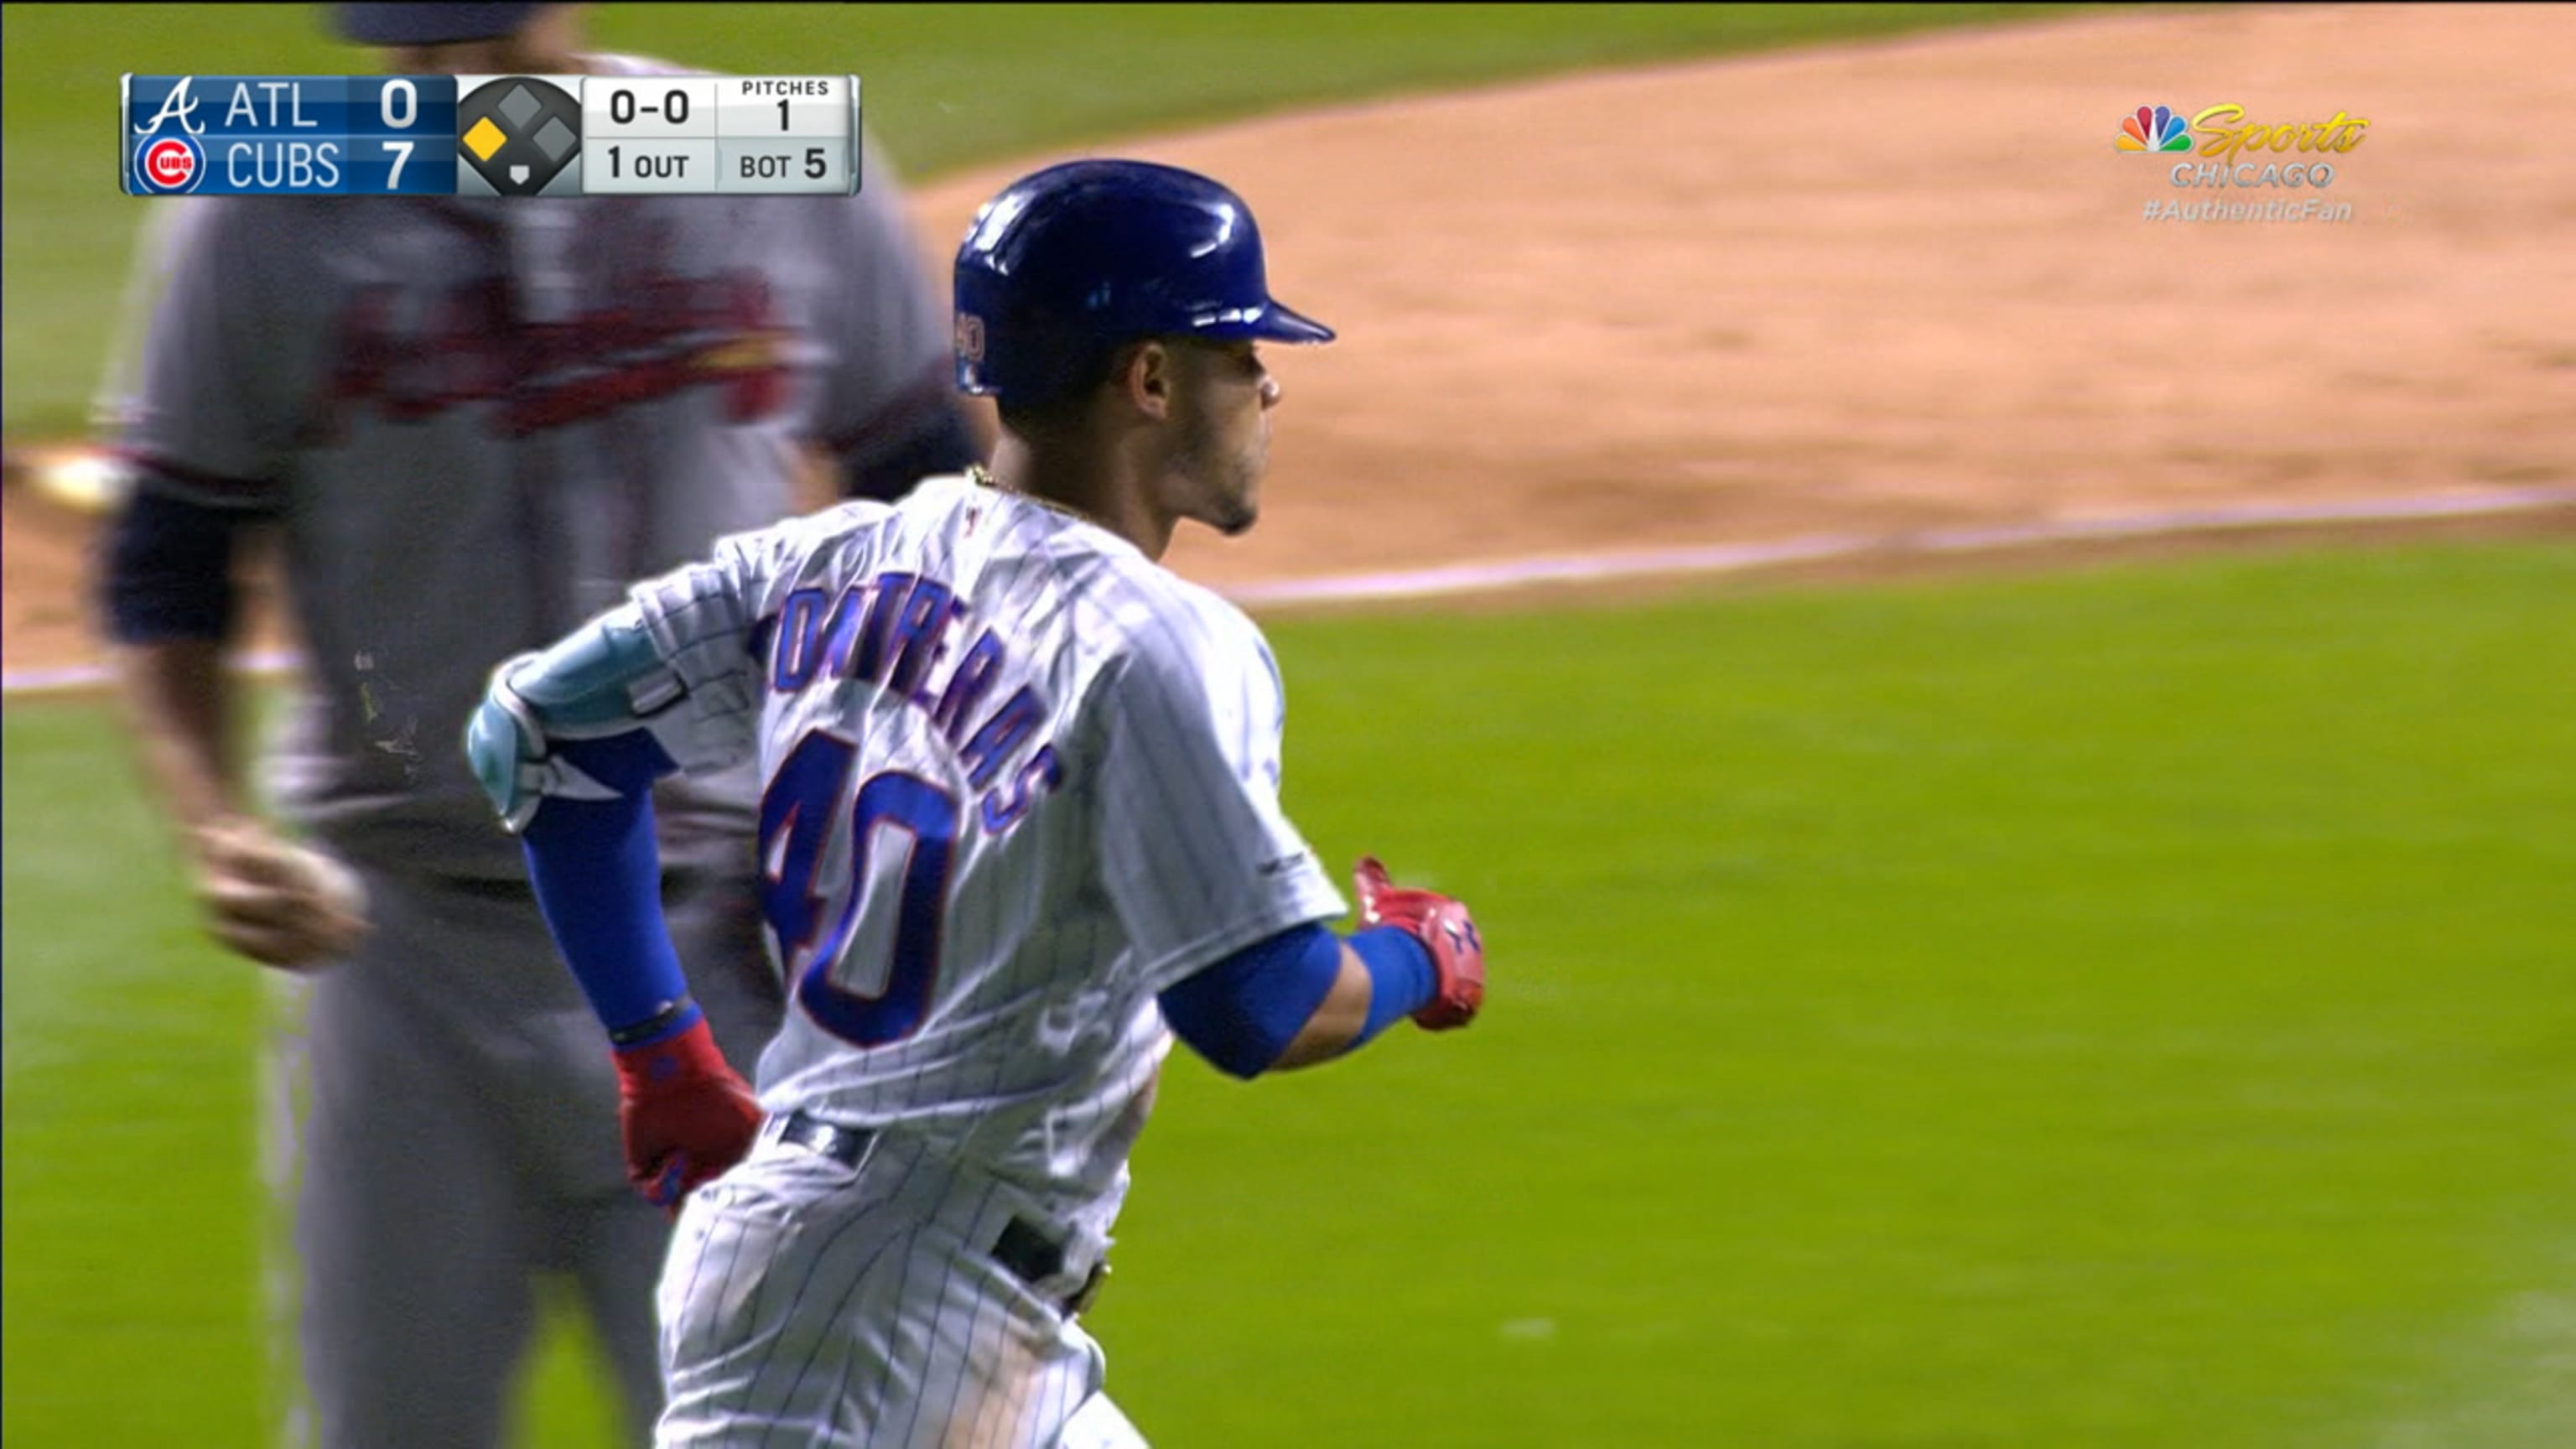 Contreras, Cubs win battle of brothers